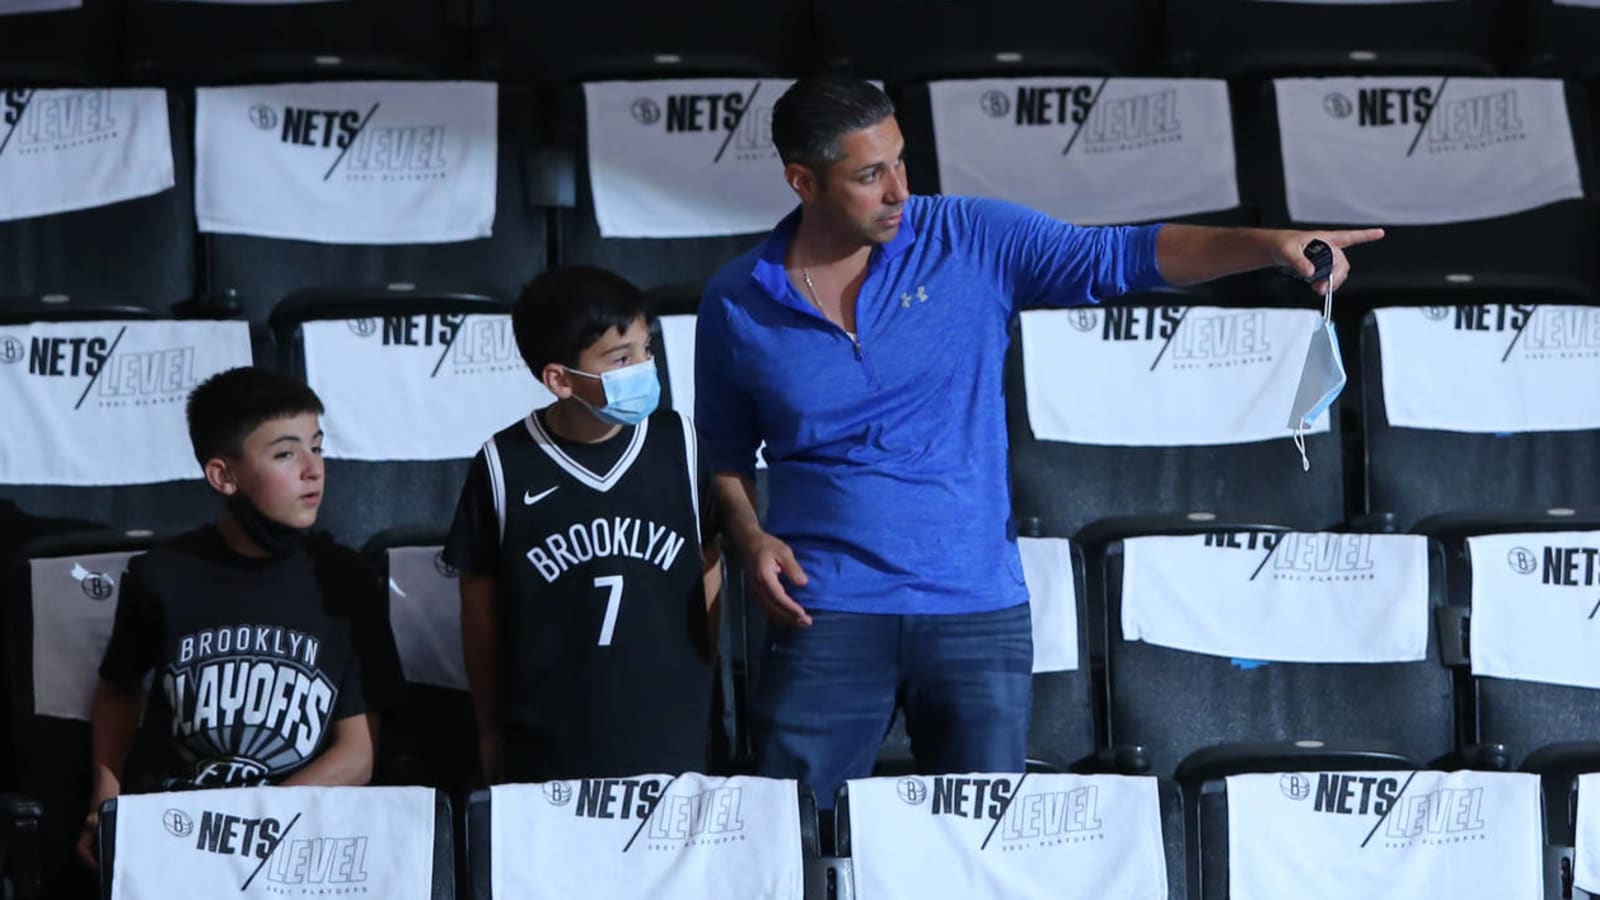 Nets to require fans, employees be vaccinated to attend games